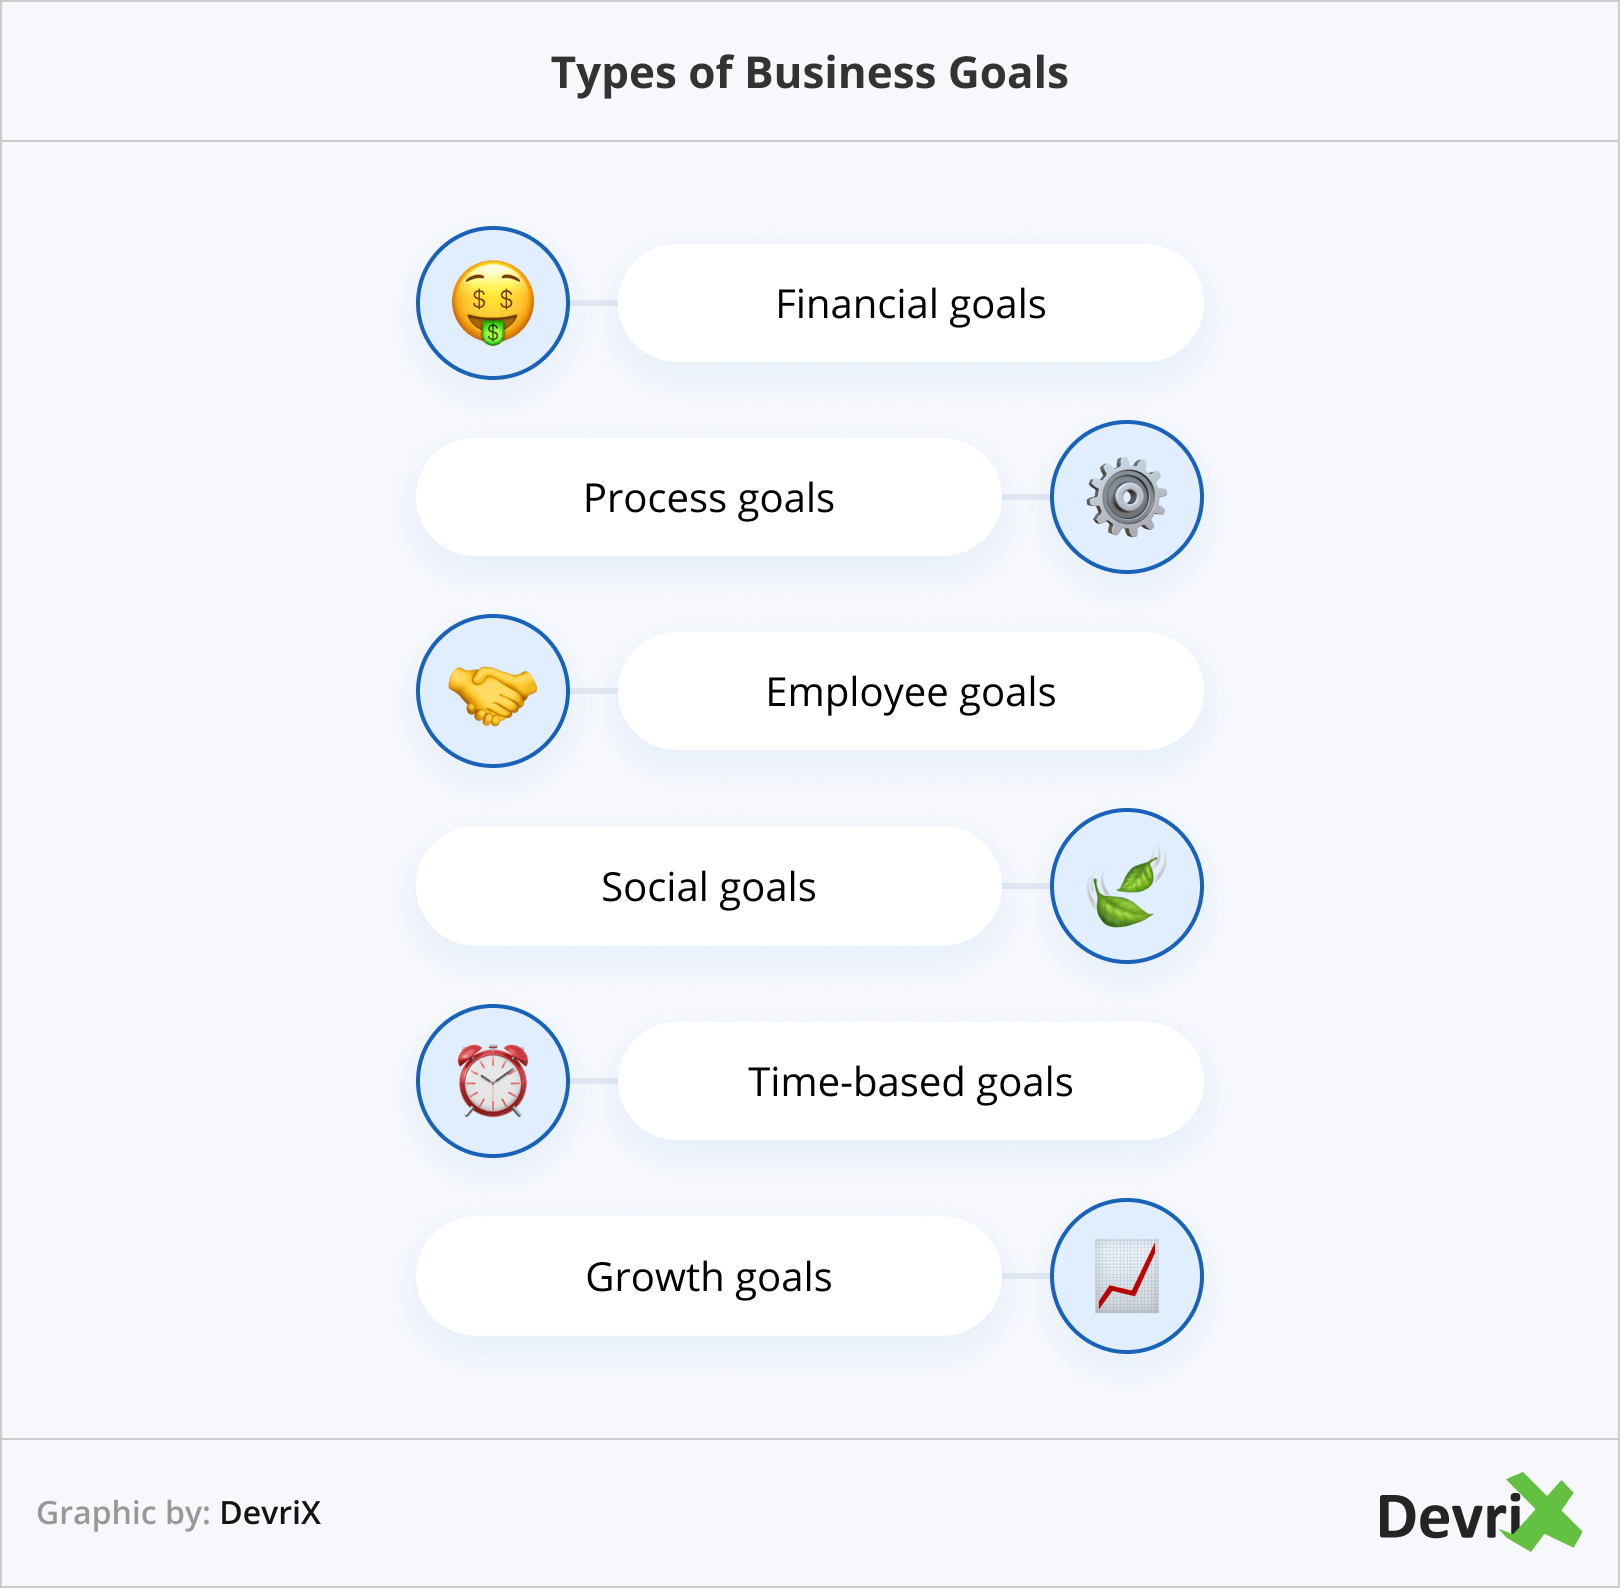 Types of Business Goals